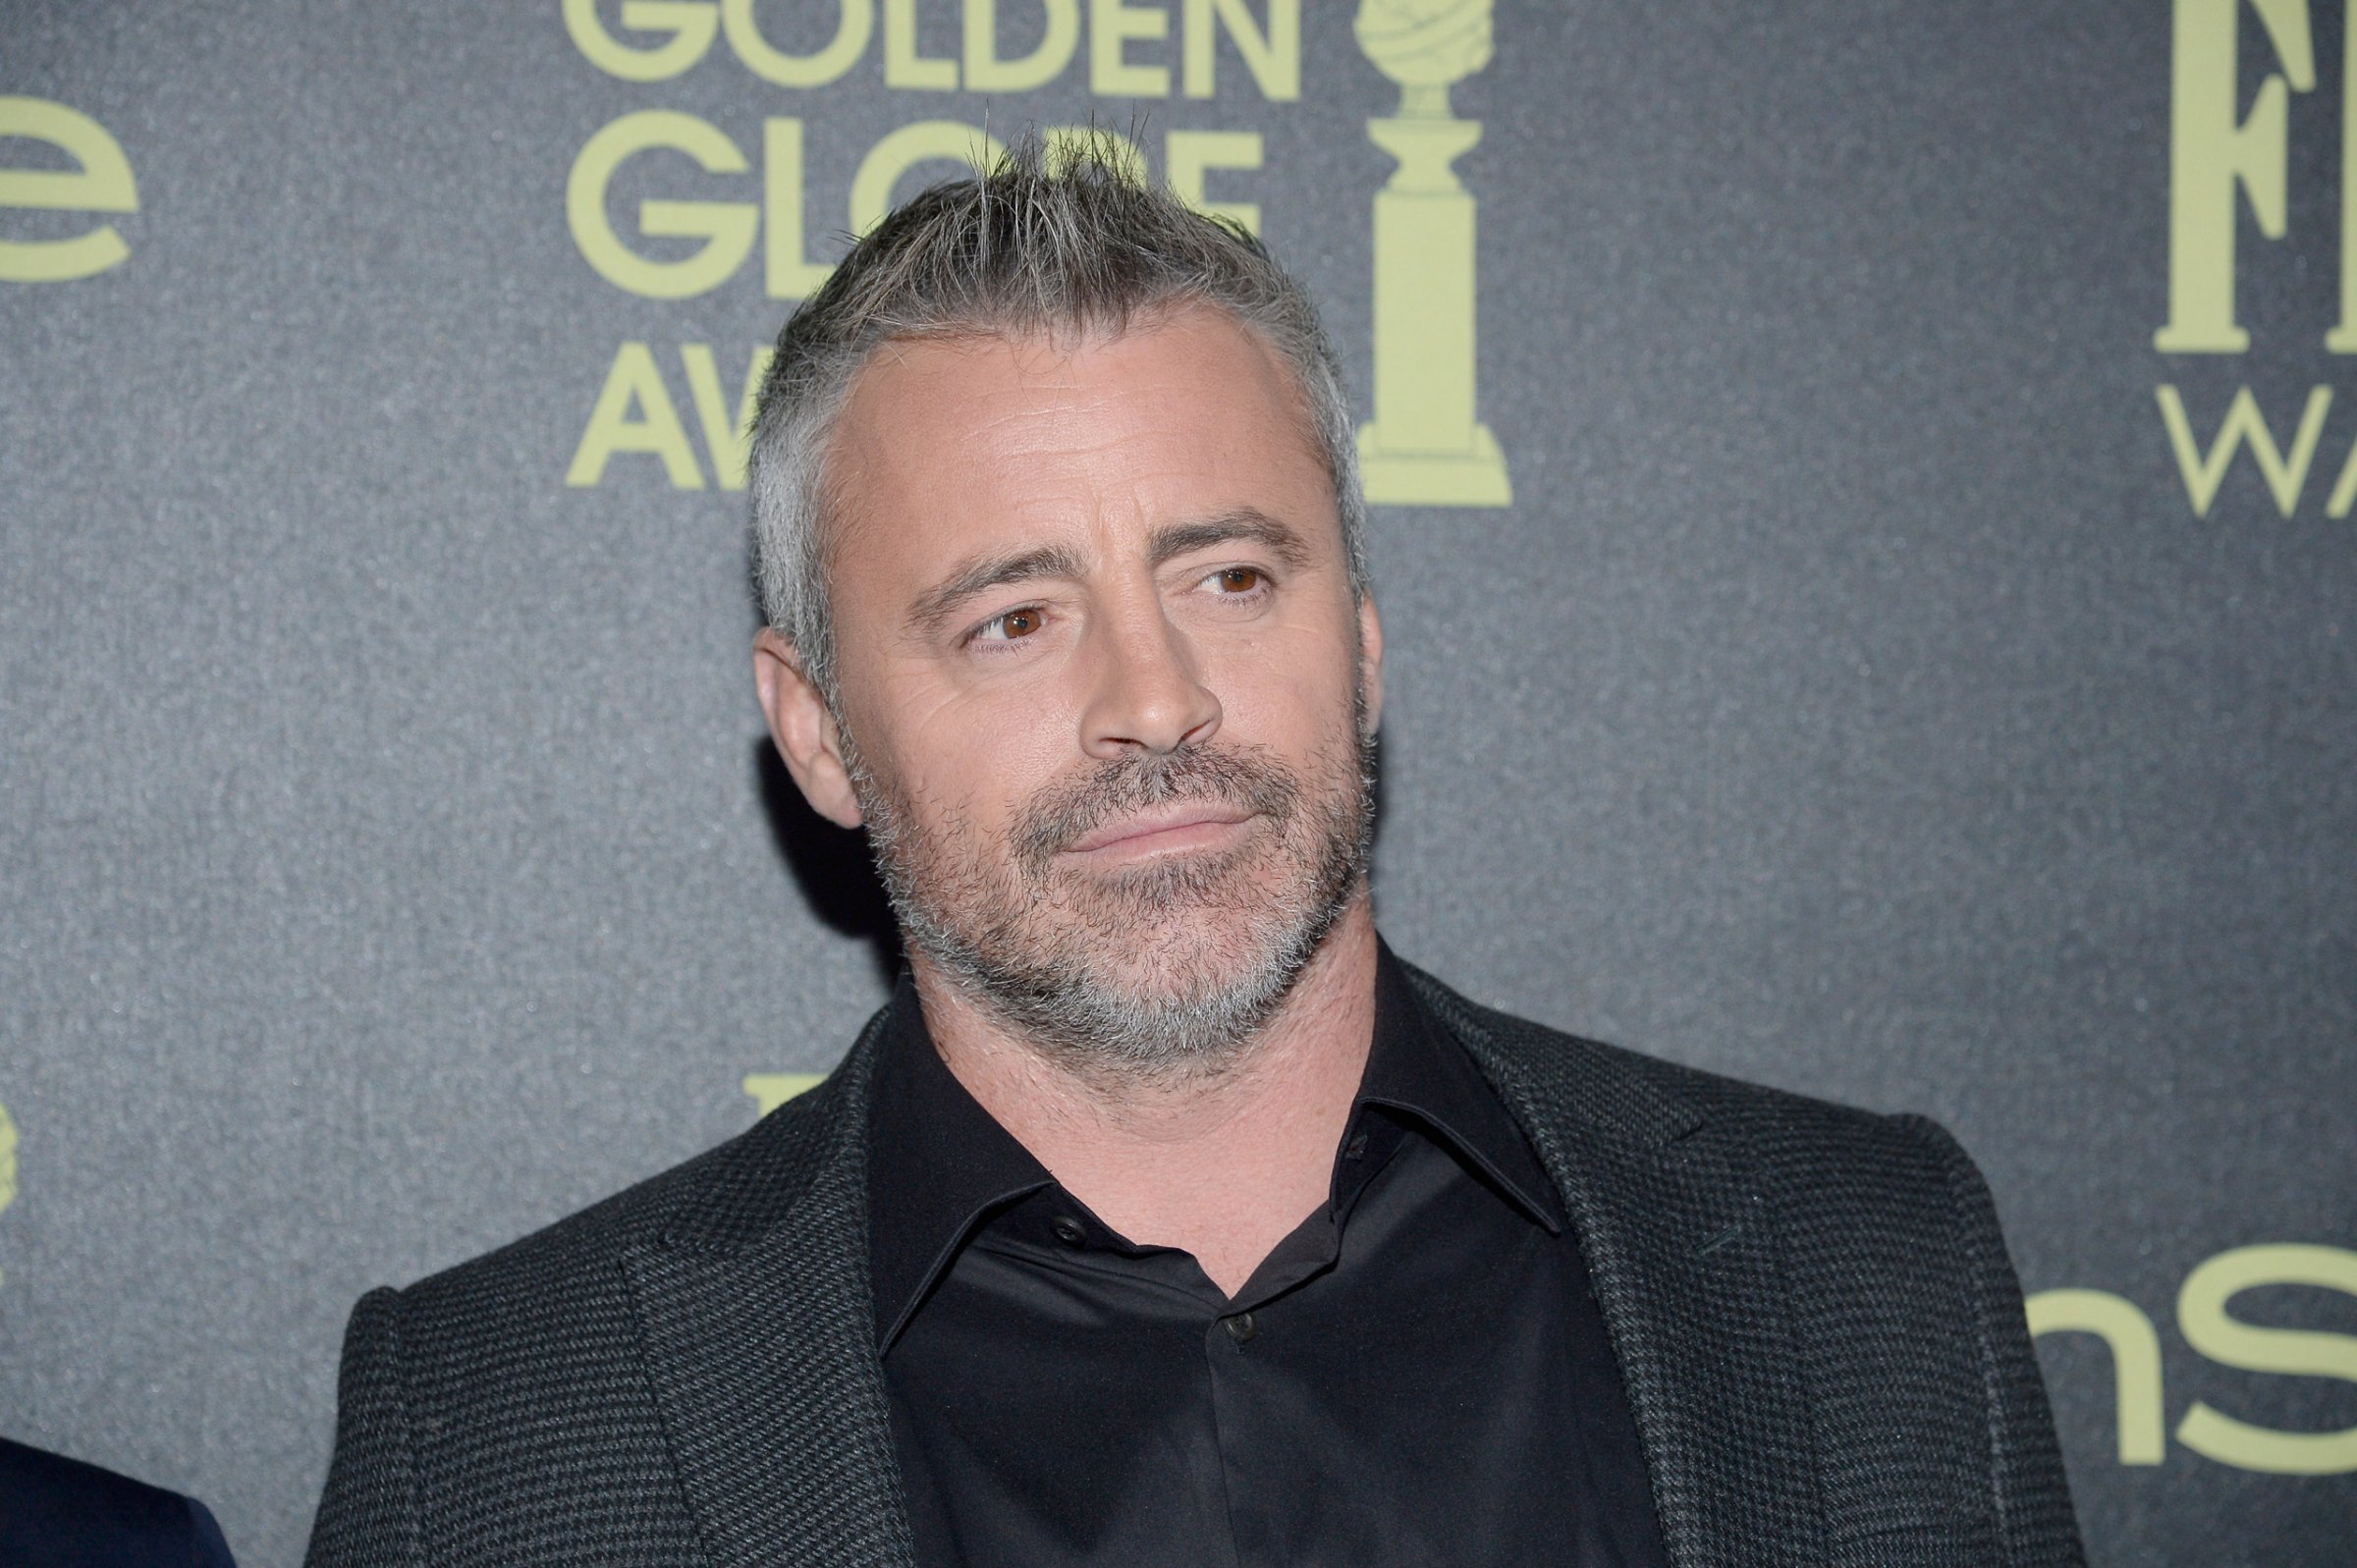 WEST HOLLYWOOD, CA - NOVEMBER 17: Actor Matt LeBlanc attends Hollywood Foreign Press Association and InStyle Celebration of The 2016 Golden Globe Award Season at Ysabel on November 17, 2015 in West Hollywood, California. (Photo by Kevork Djansezian/Getty Images)